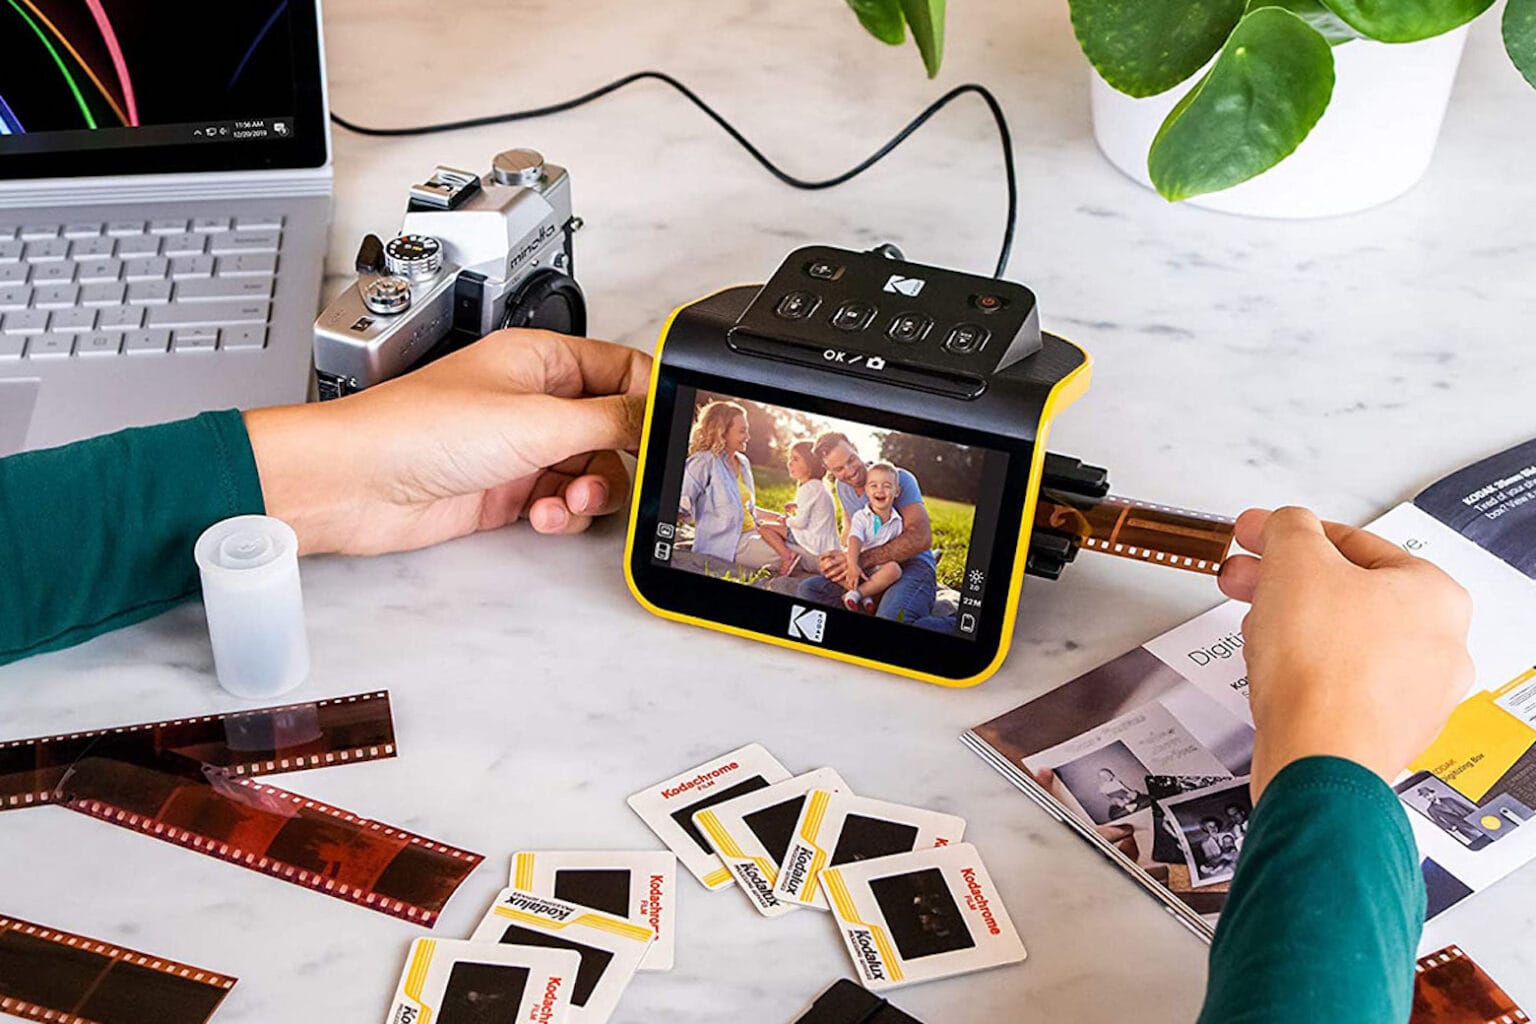 Gift a film lover the Kodak Slide N Scan, which can digitize film and slides for only $170 with free shipping!